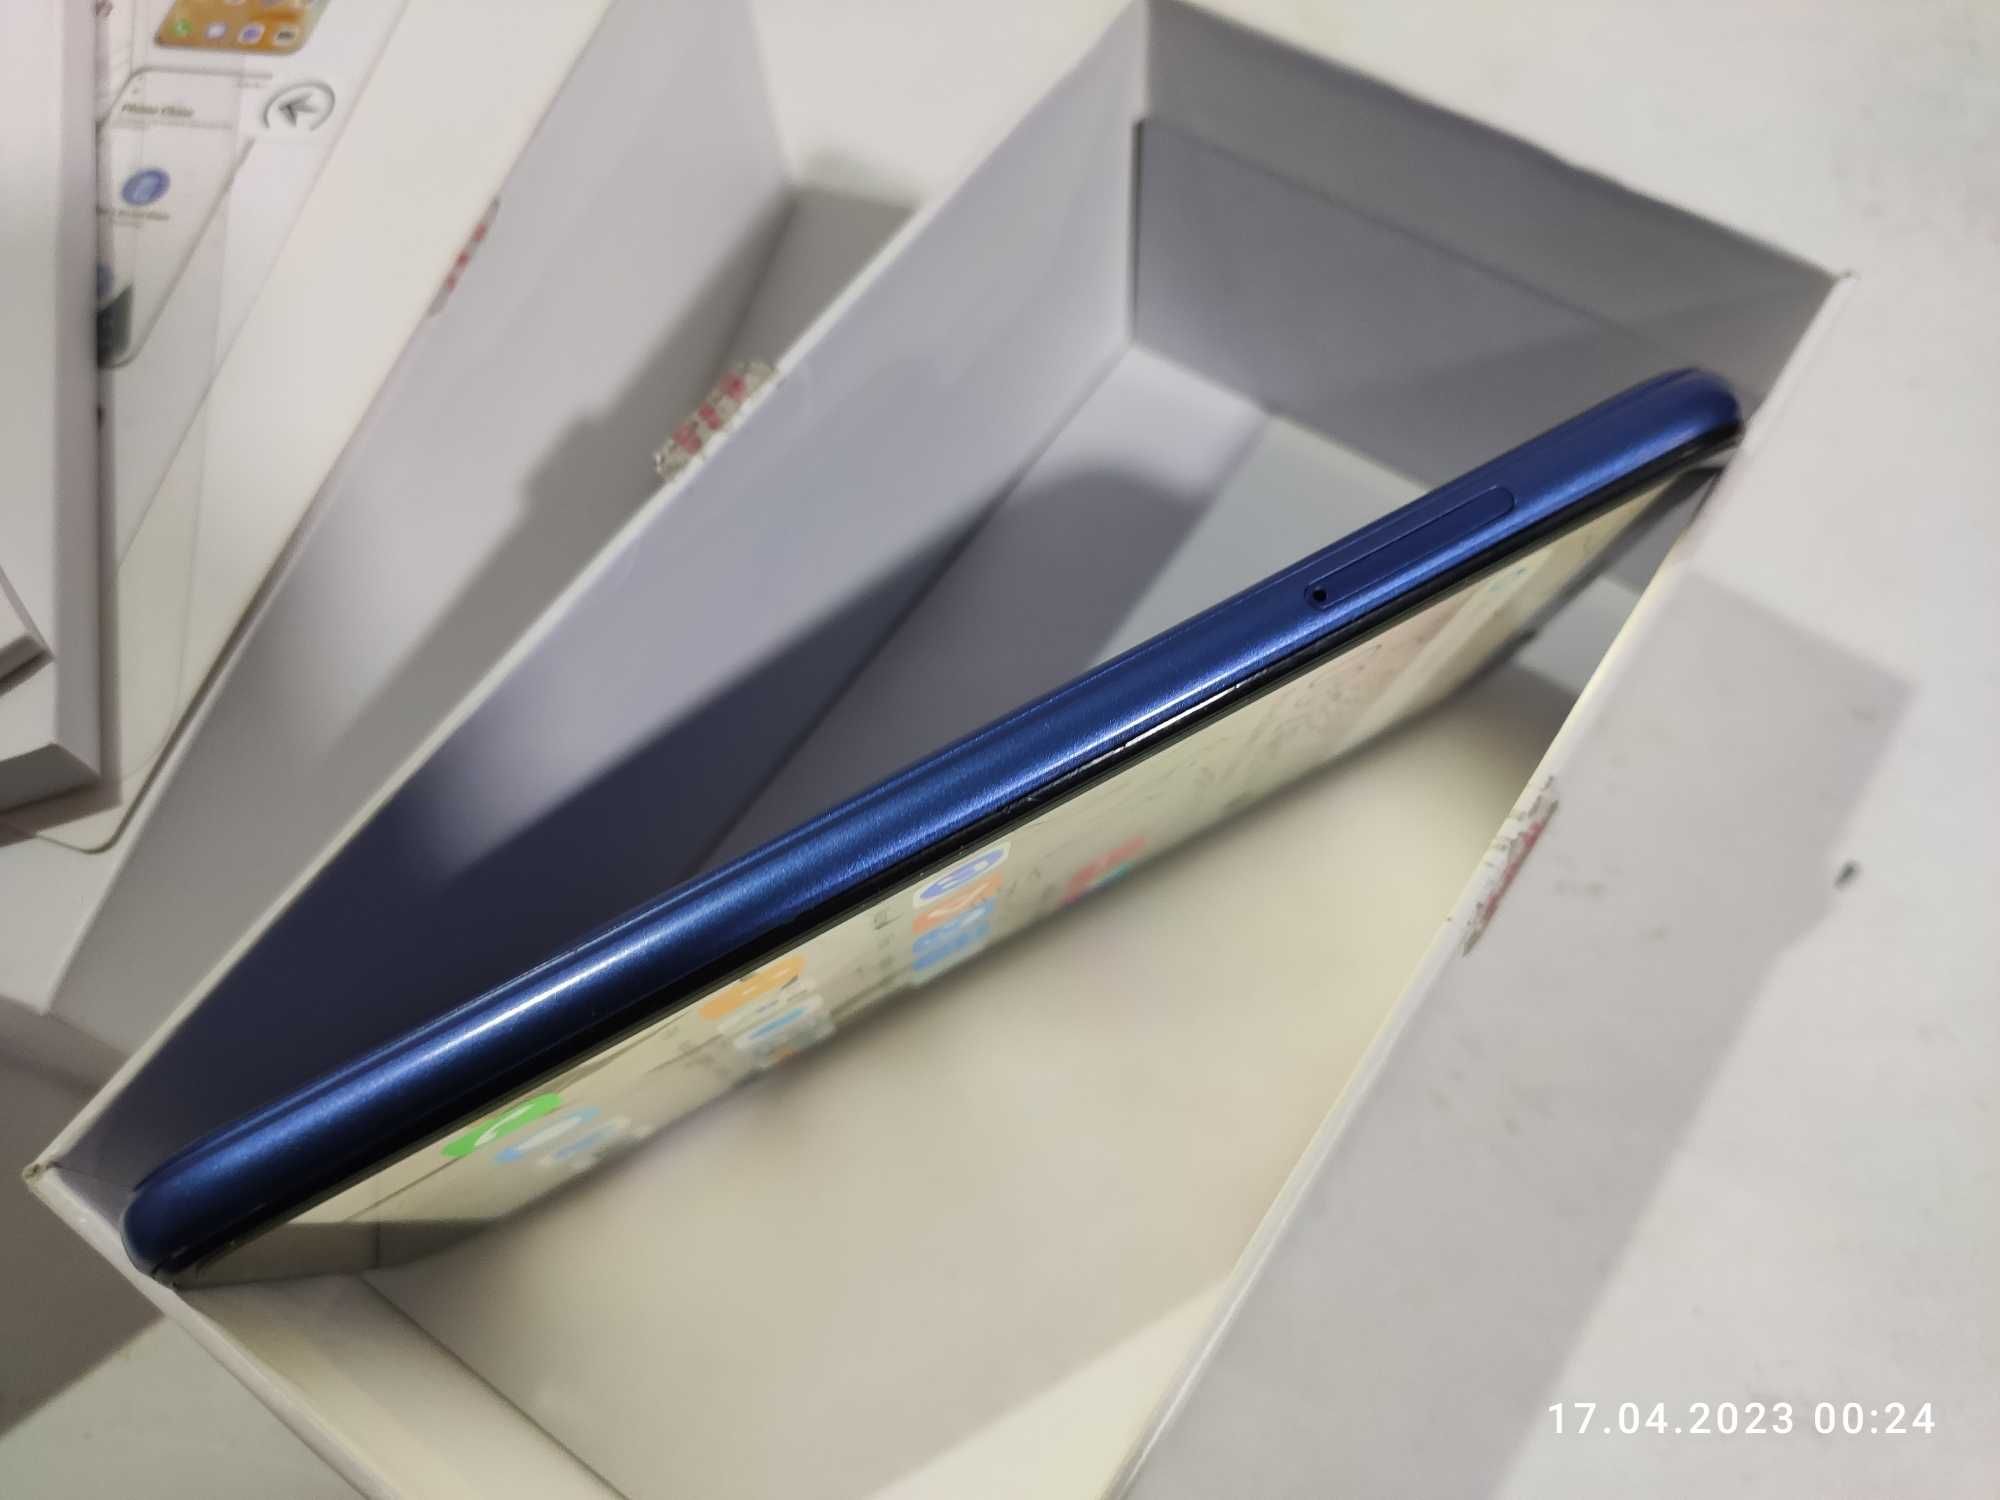 Huawei Y5P 2/32GB ,kolor Blue ,Android 10